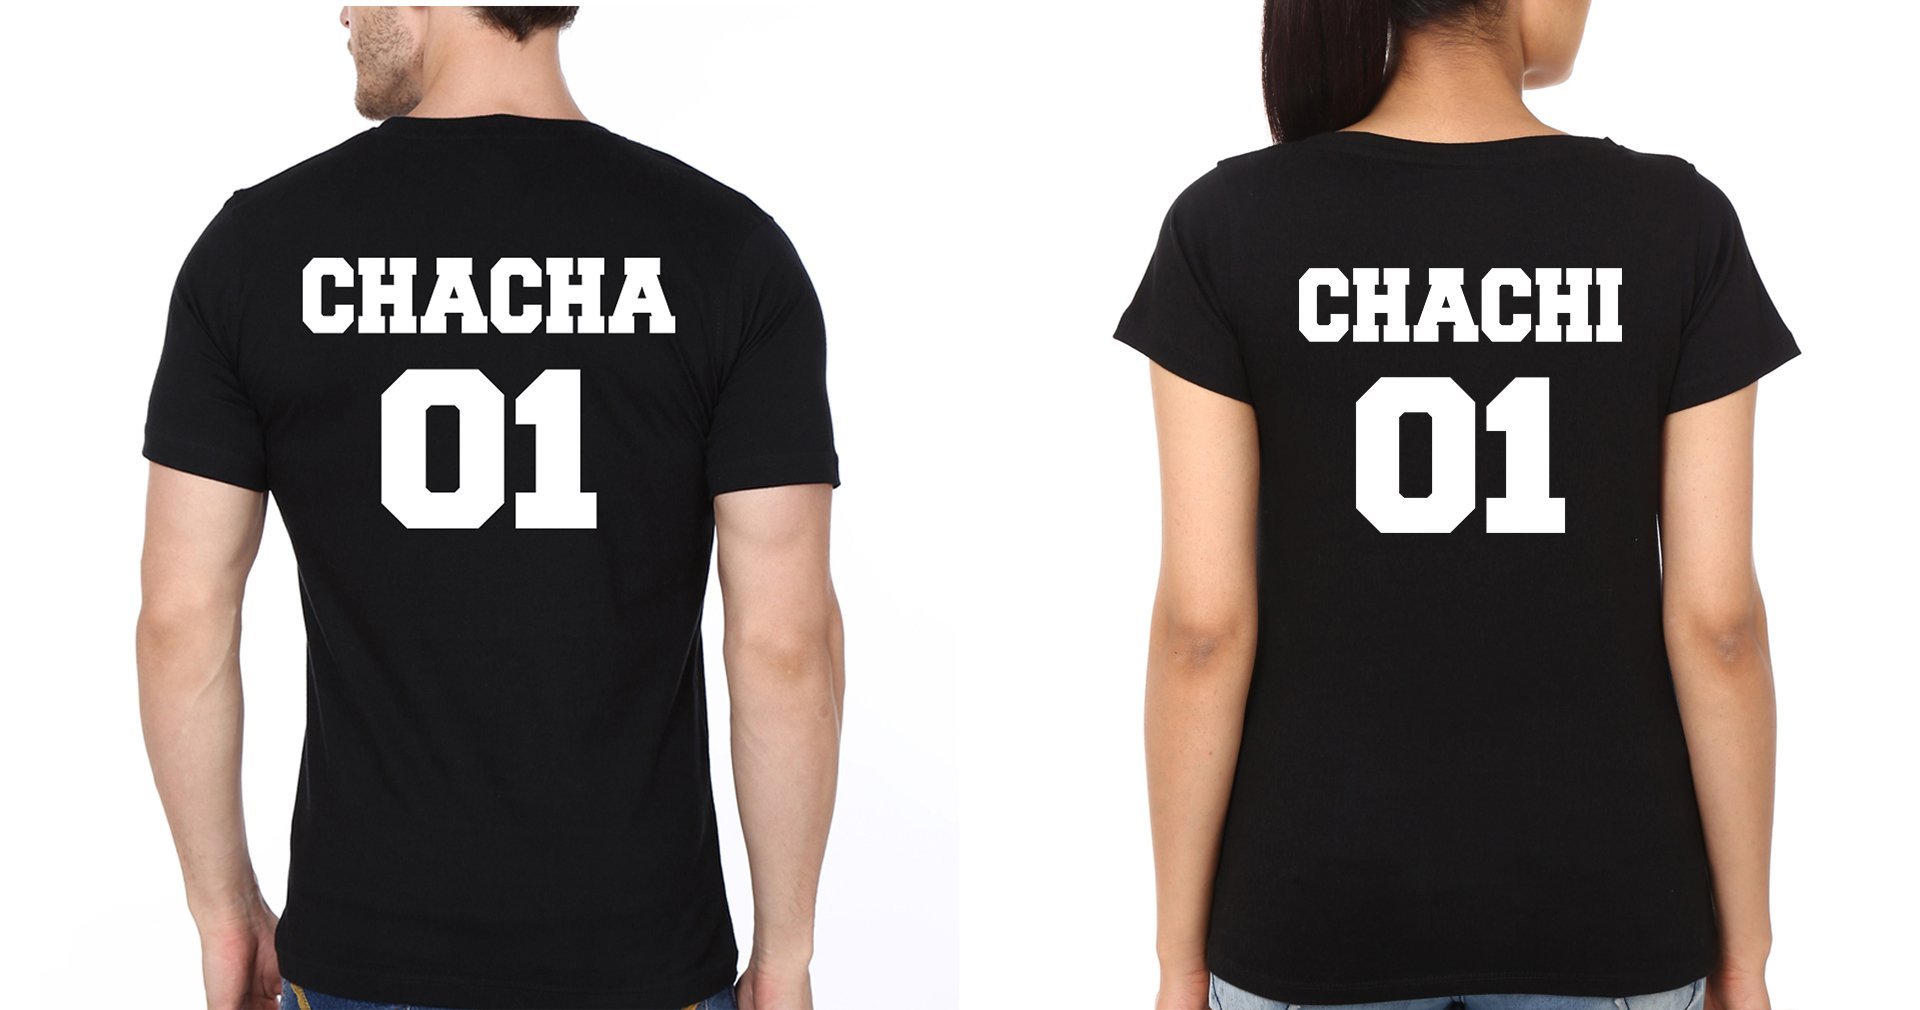 Chacha01 Chachi01 Half Sleeves T-Shirts-FunkyTradition - FunkyTradition